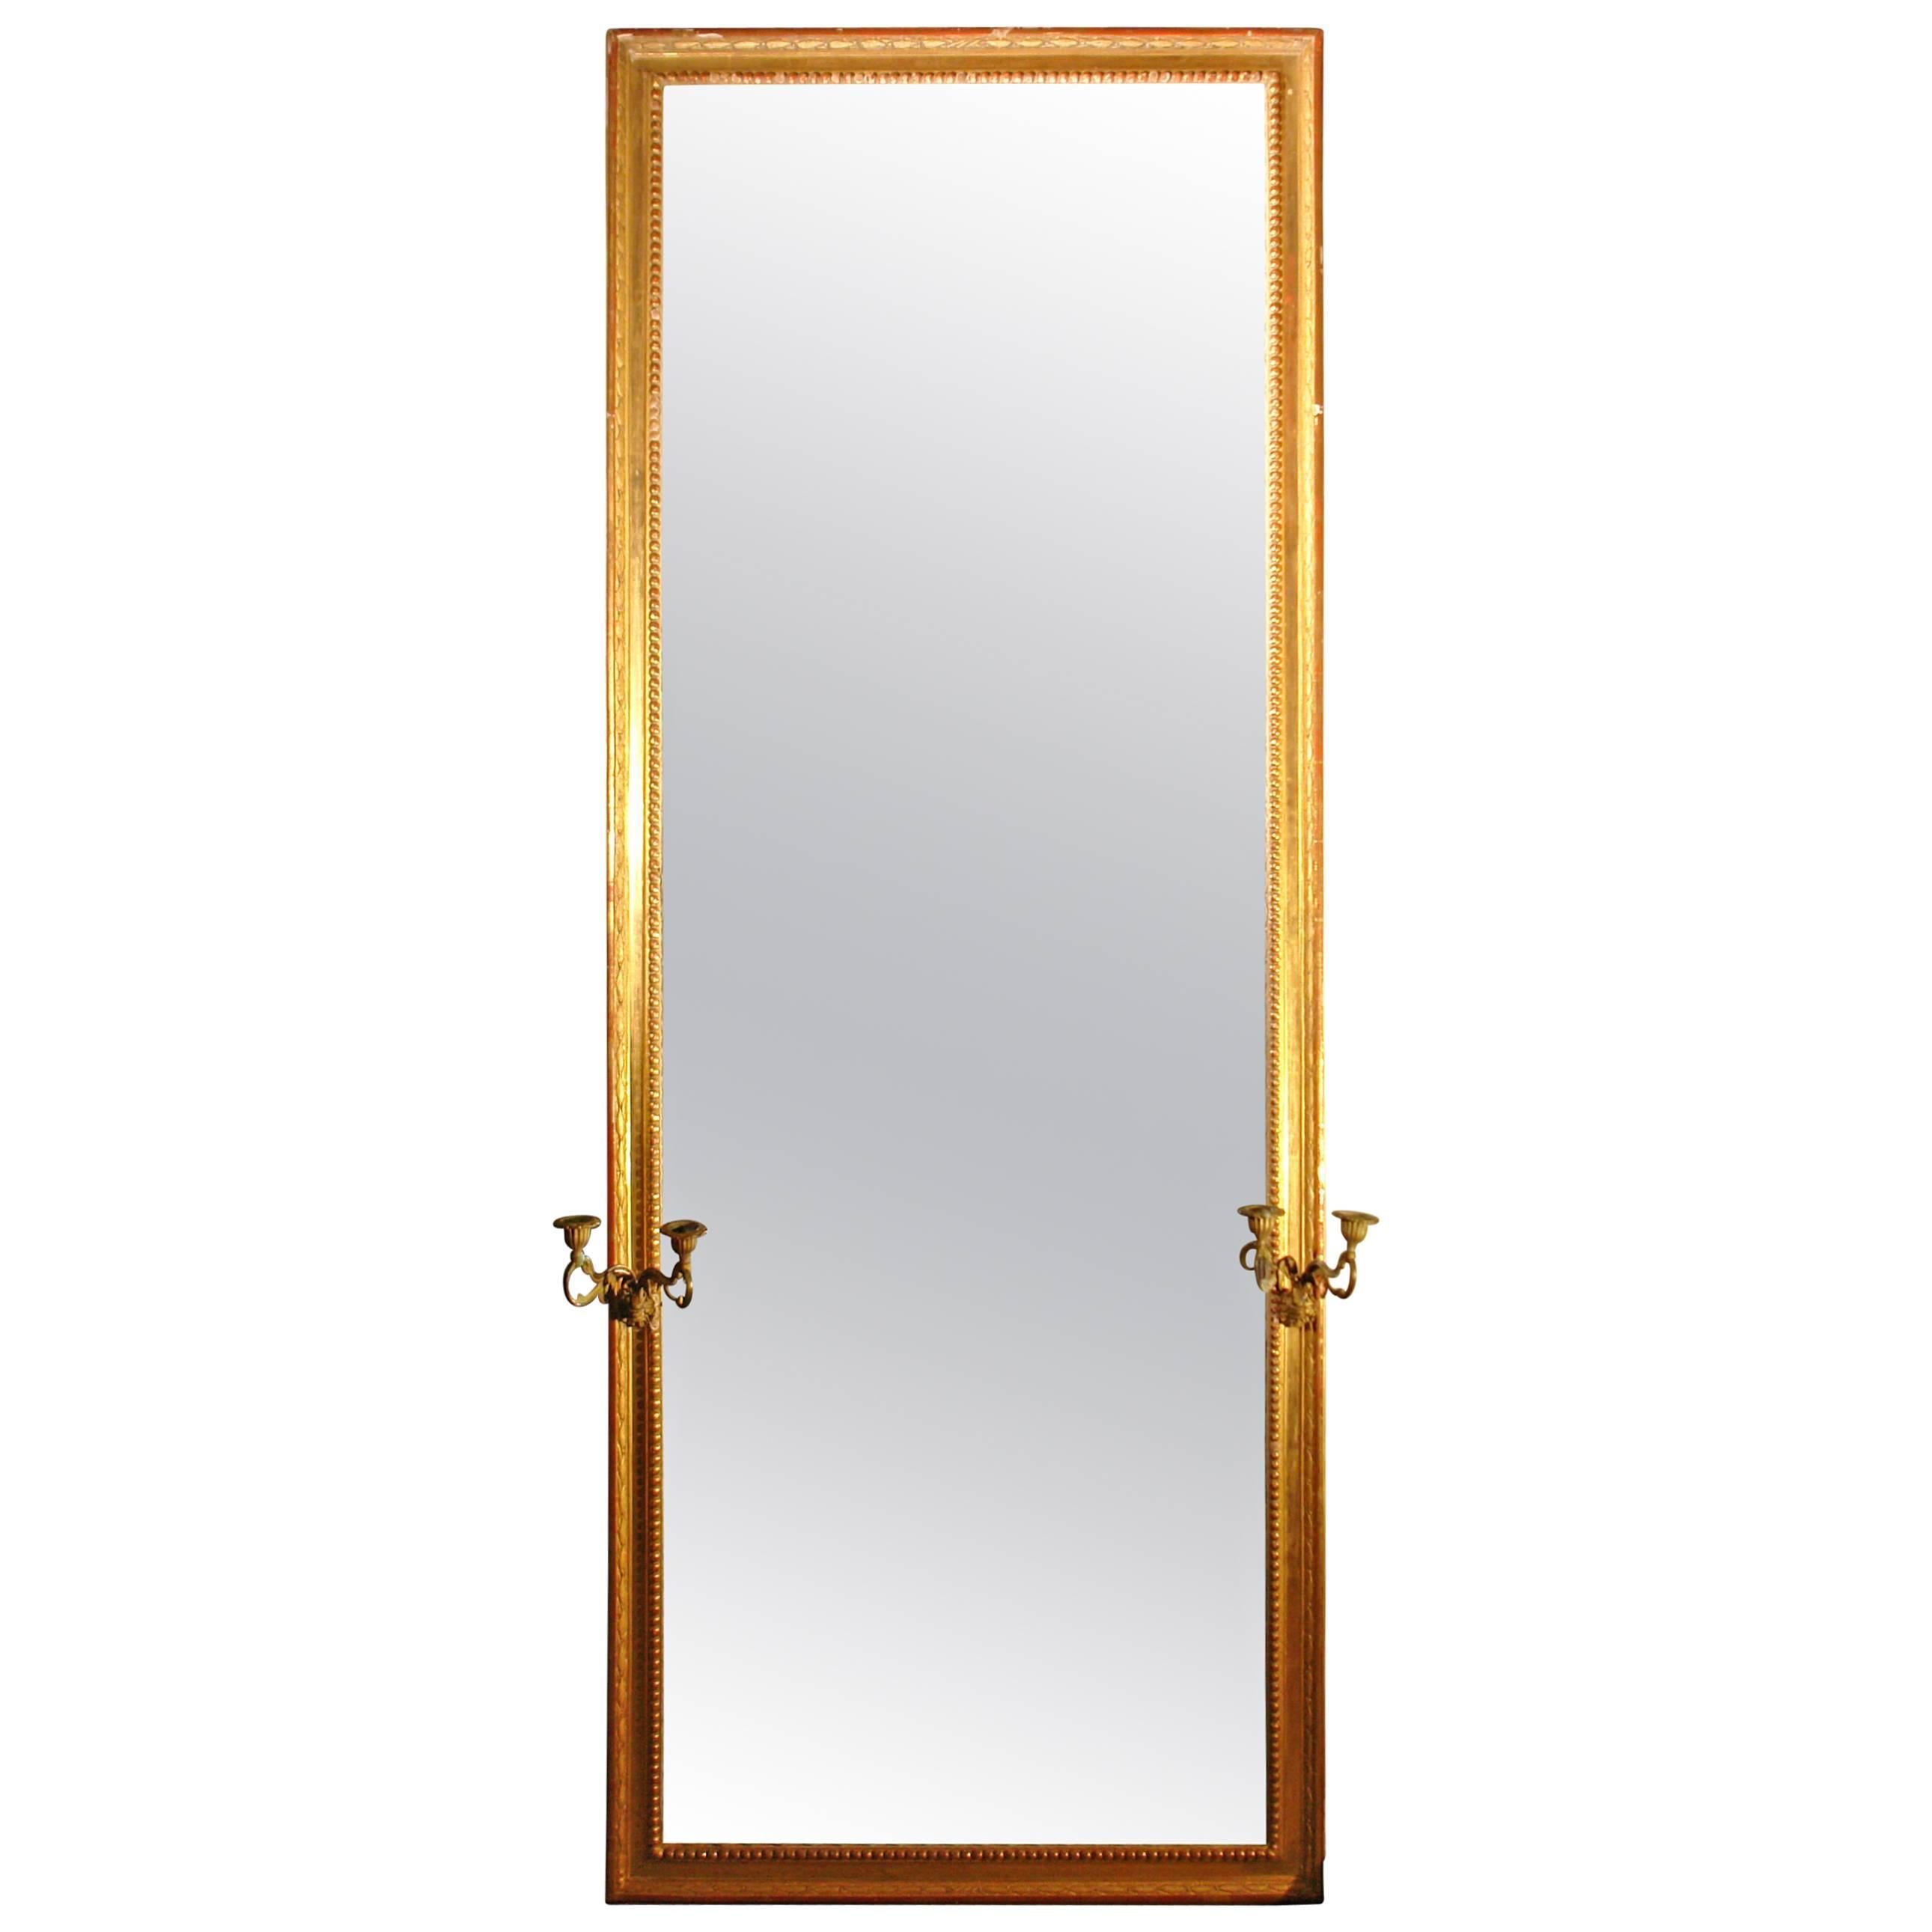 19th Century French Gilt Mirror with Sconces